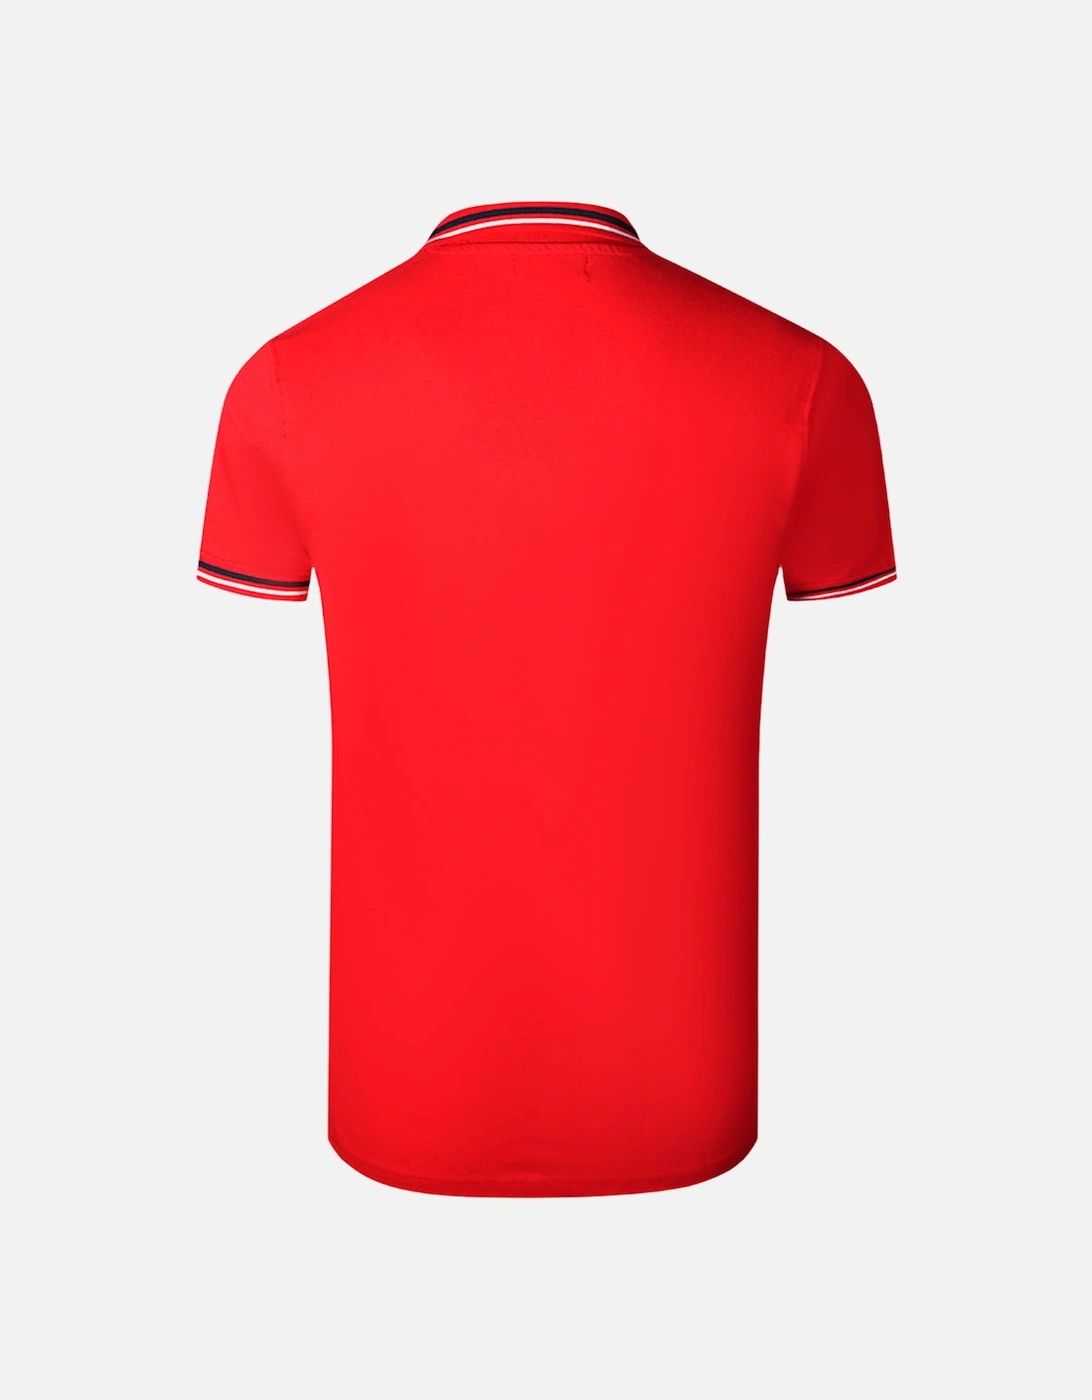 Cavalli Class Twinned Tipped Collar Red Polo Shirt